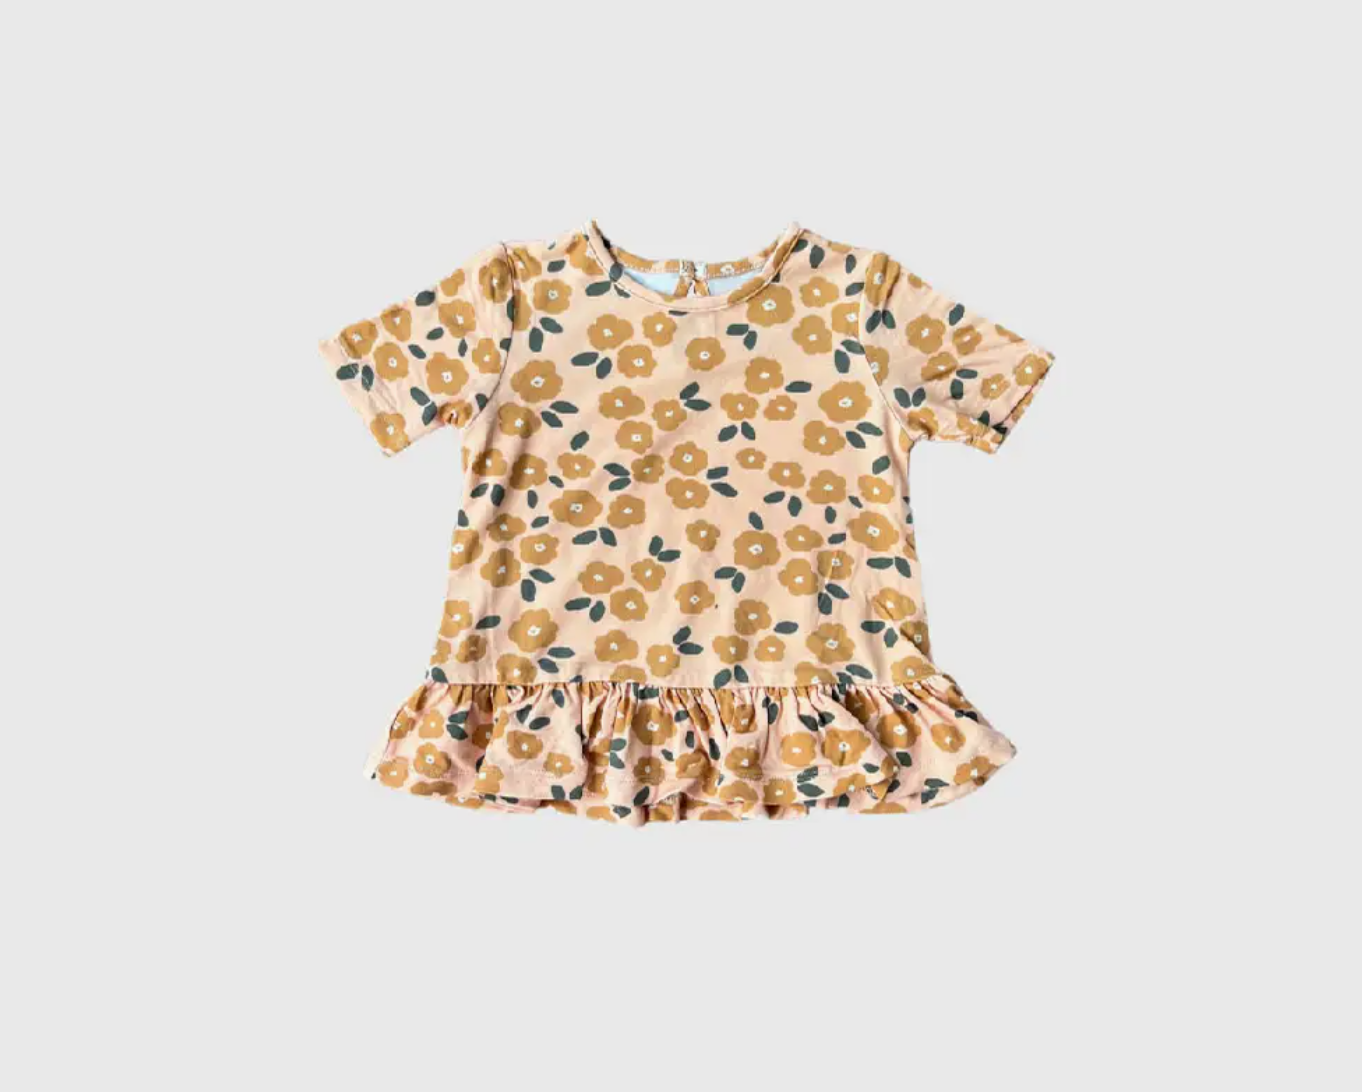 Girl's Peplum Top in Gold Floral